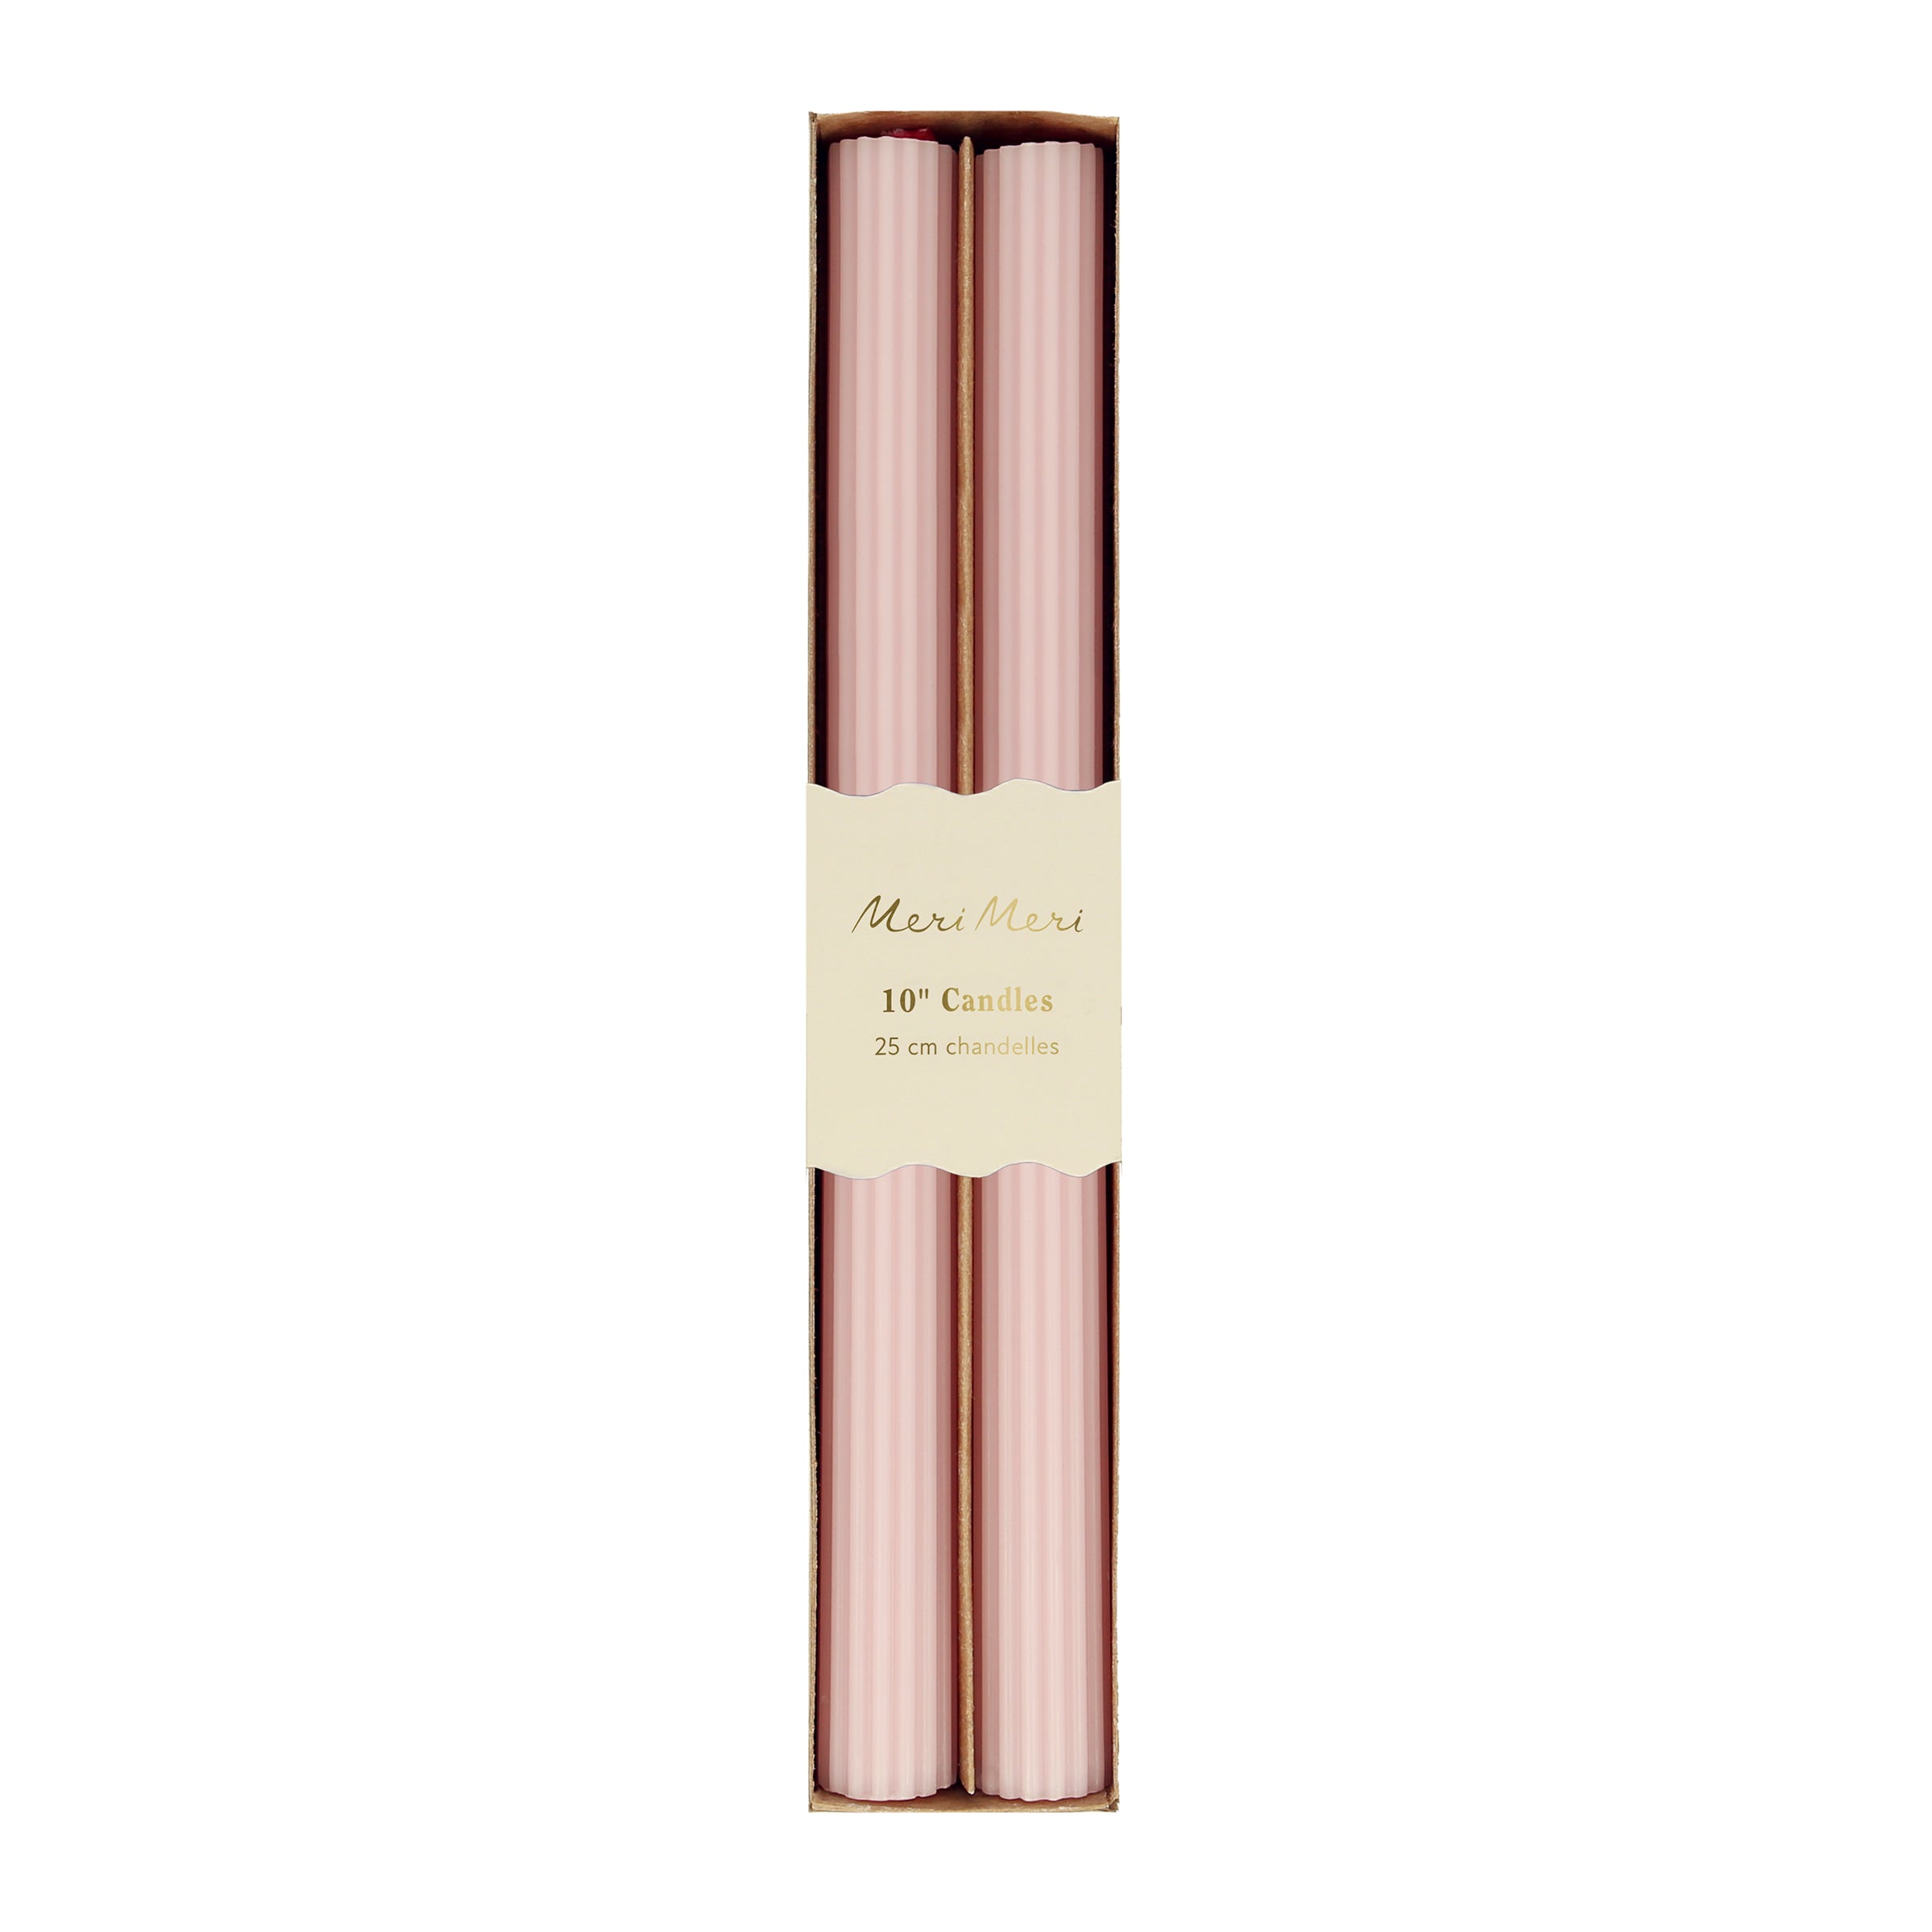 Our tall candles, in a pink color with ridged details, add a stunning look to any party.